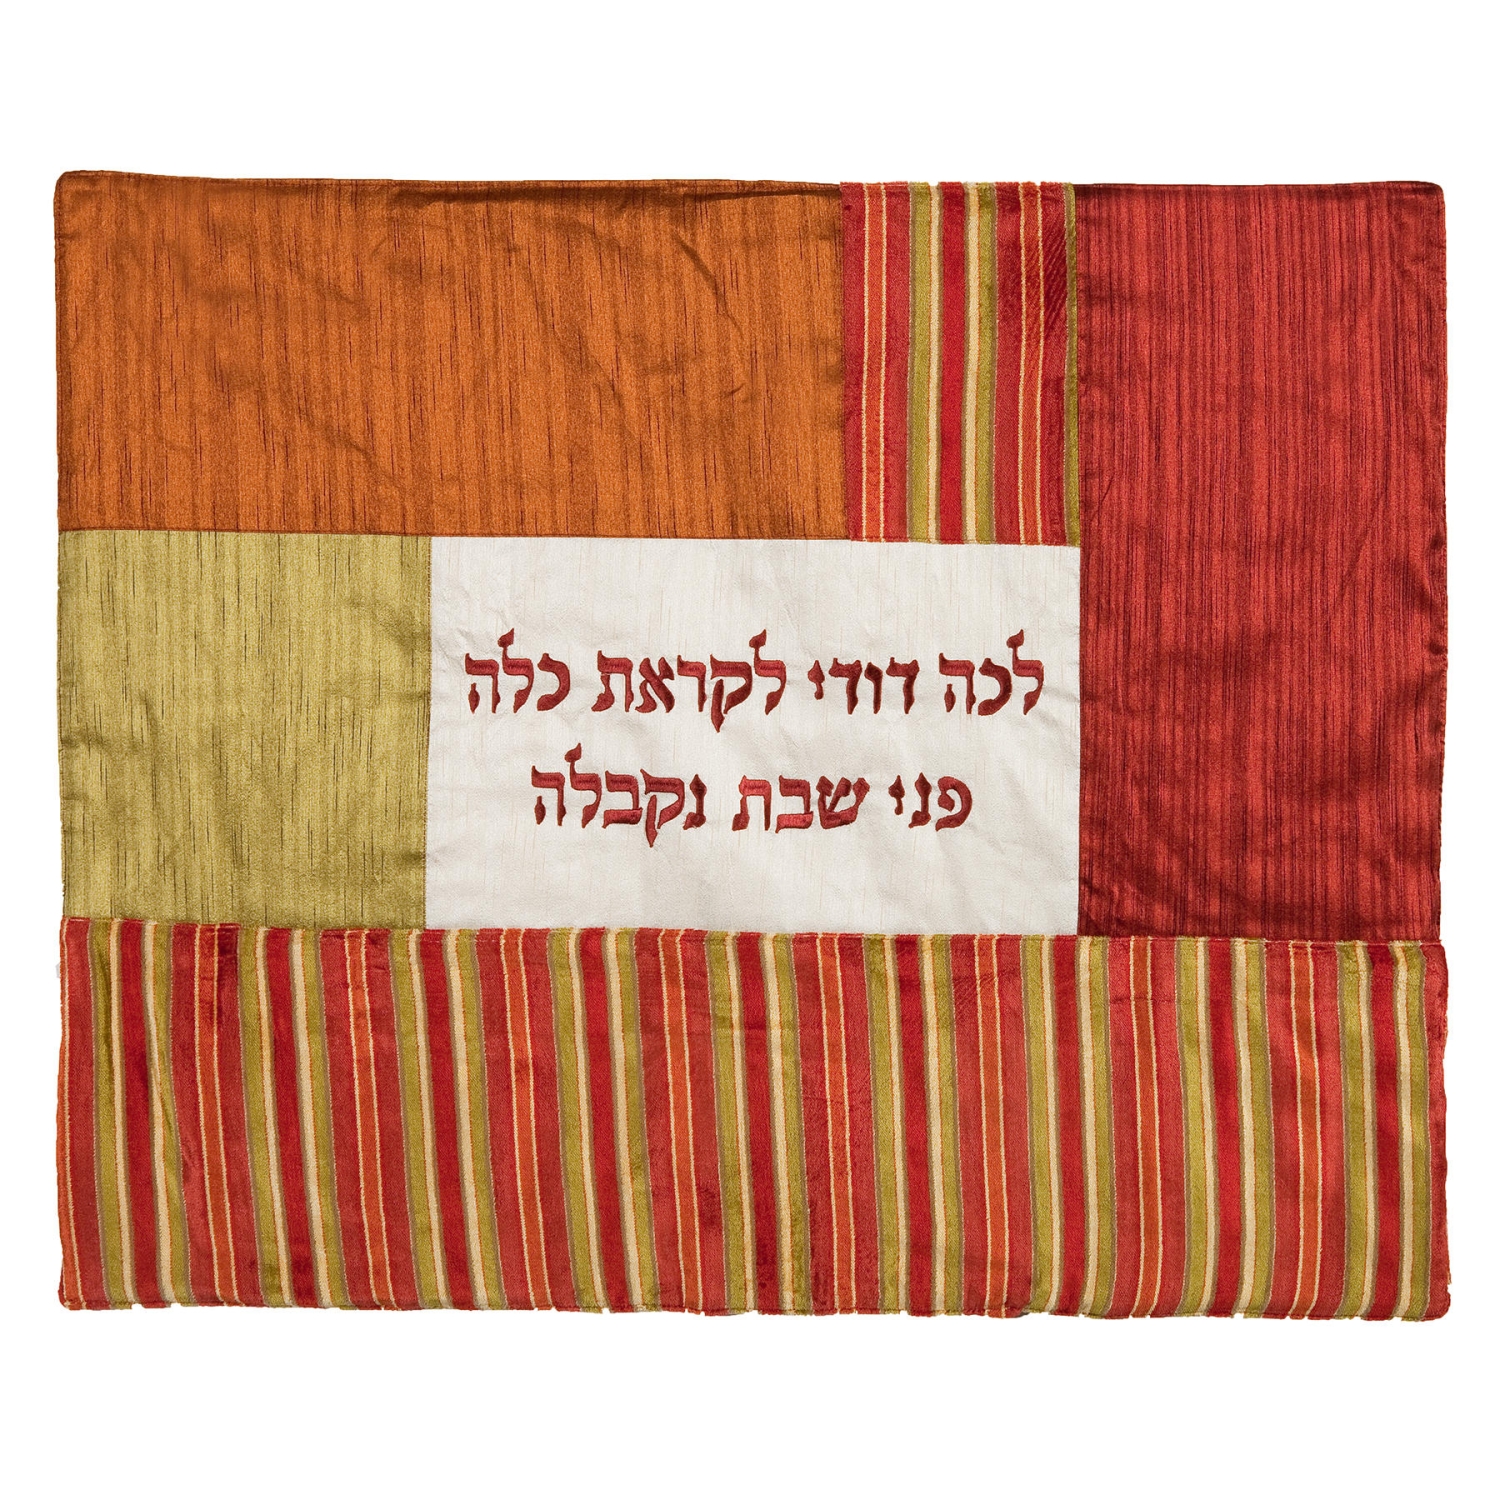 Yair Emanuel Embroidered Plata Cover (Hot Plate Cover) - Fabric Collage - Orange / Red - 1